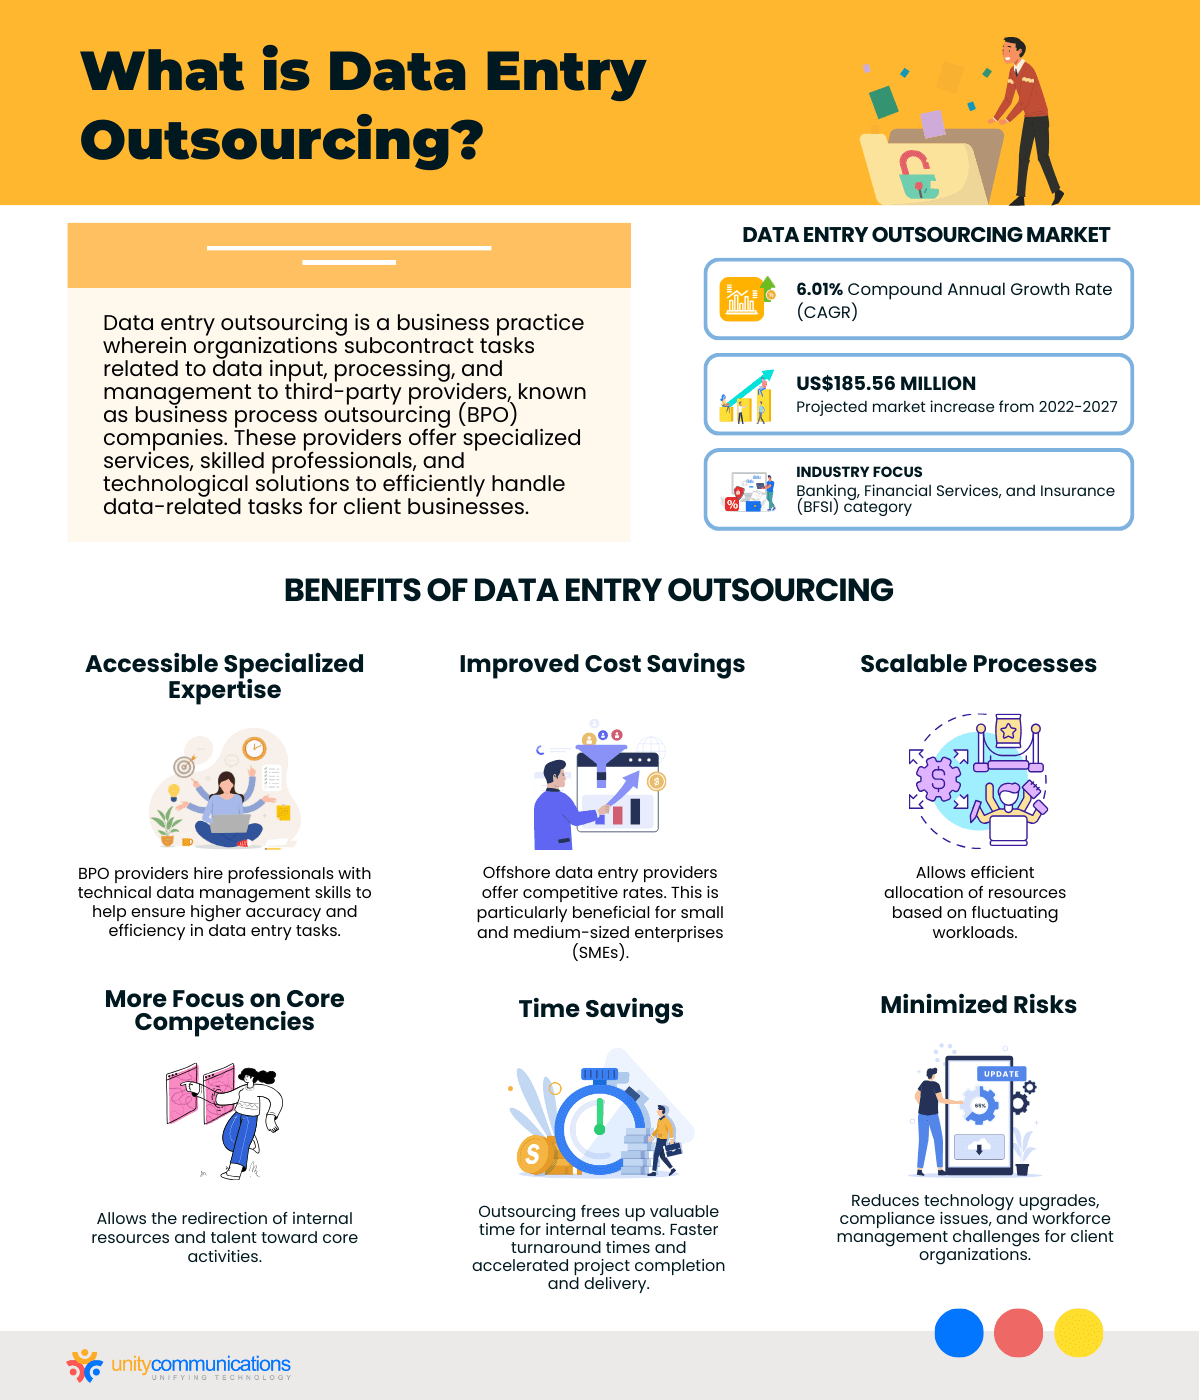 What is Data Entry Outsourcing